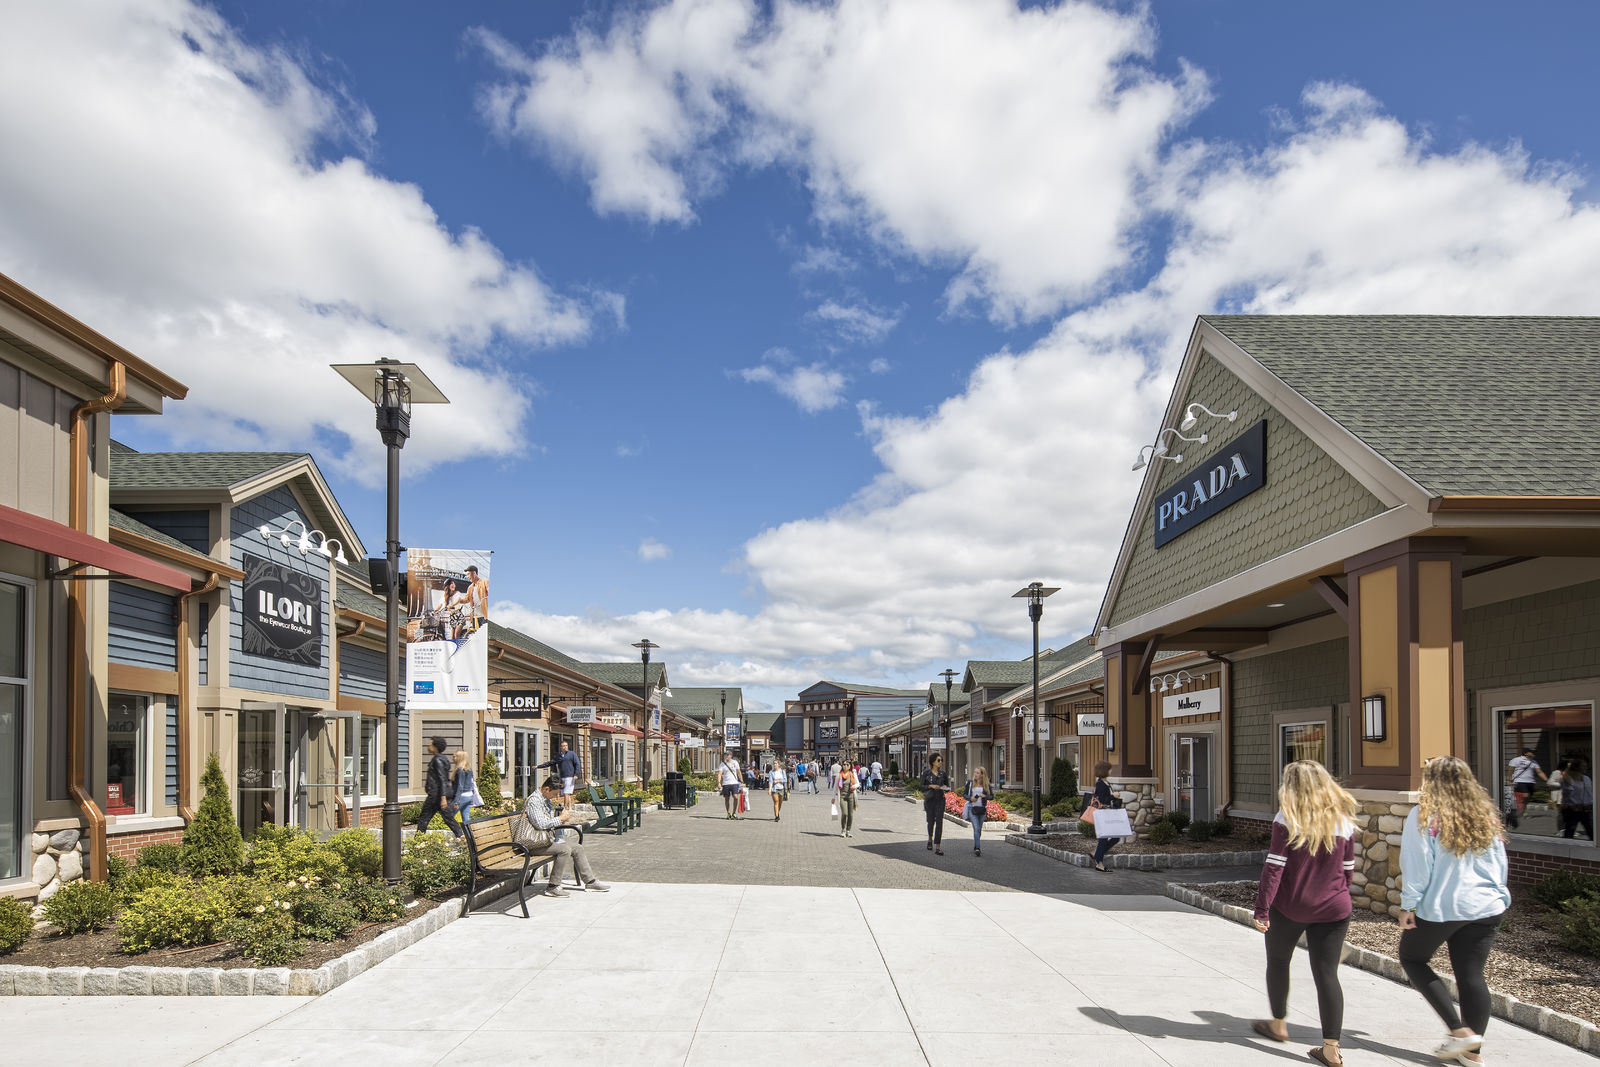 294 Woodbury Common Premium Outlet Images, Stock Photos, 3D objects, &  Vectors